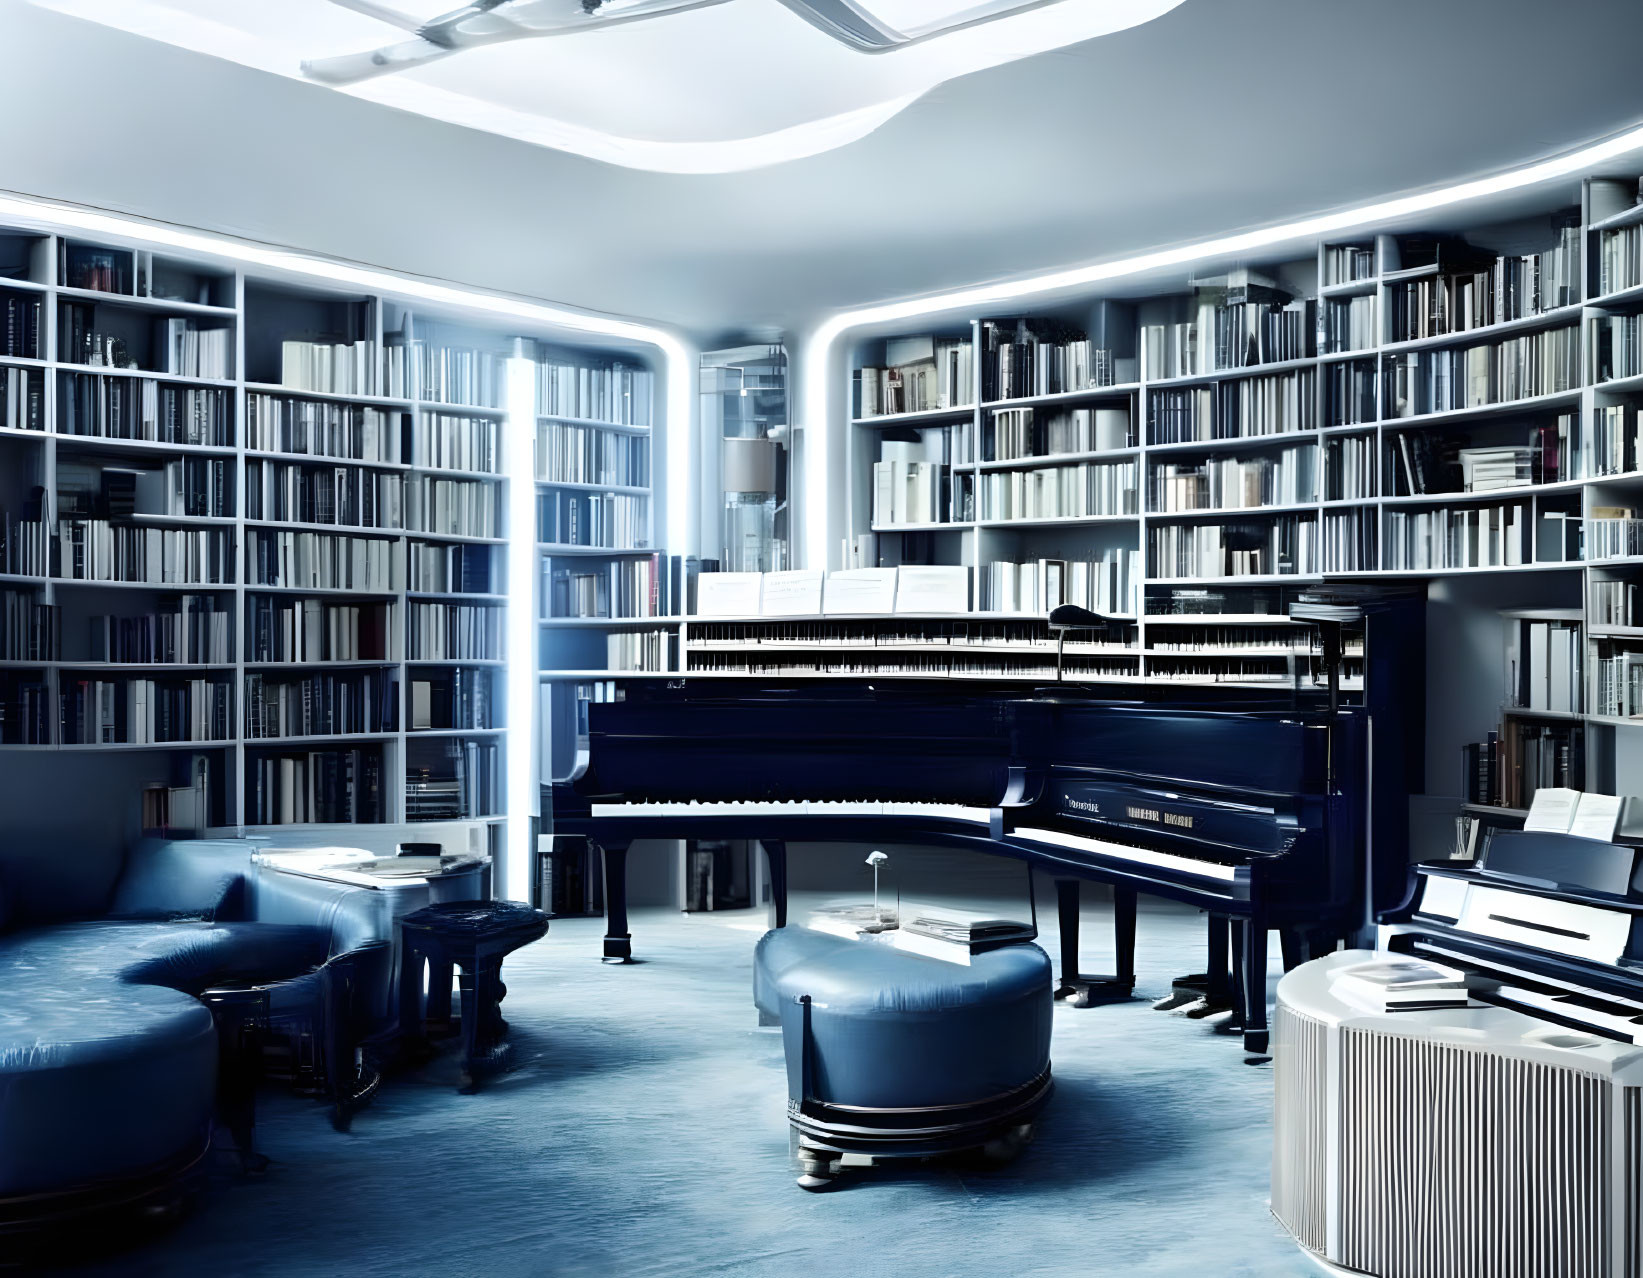 Contemporary home library with floor-to-ceiling bookshelves, grand piano, plush blue seating,